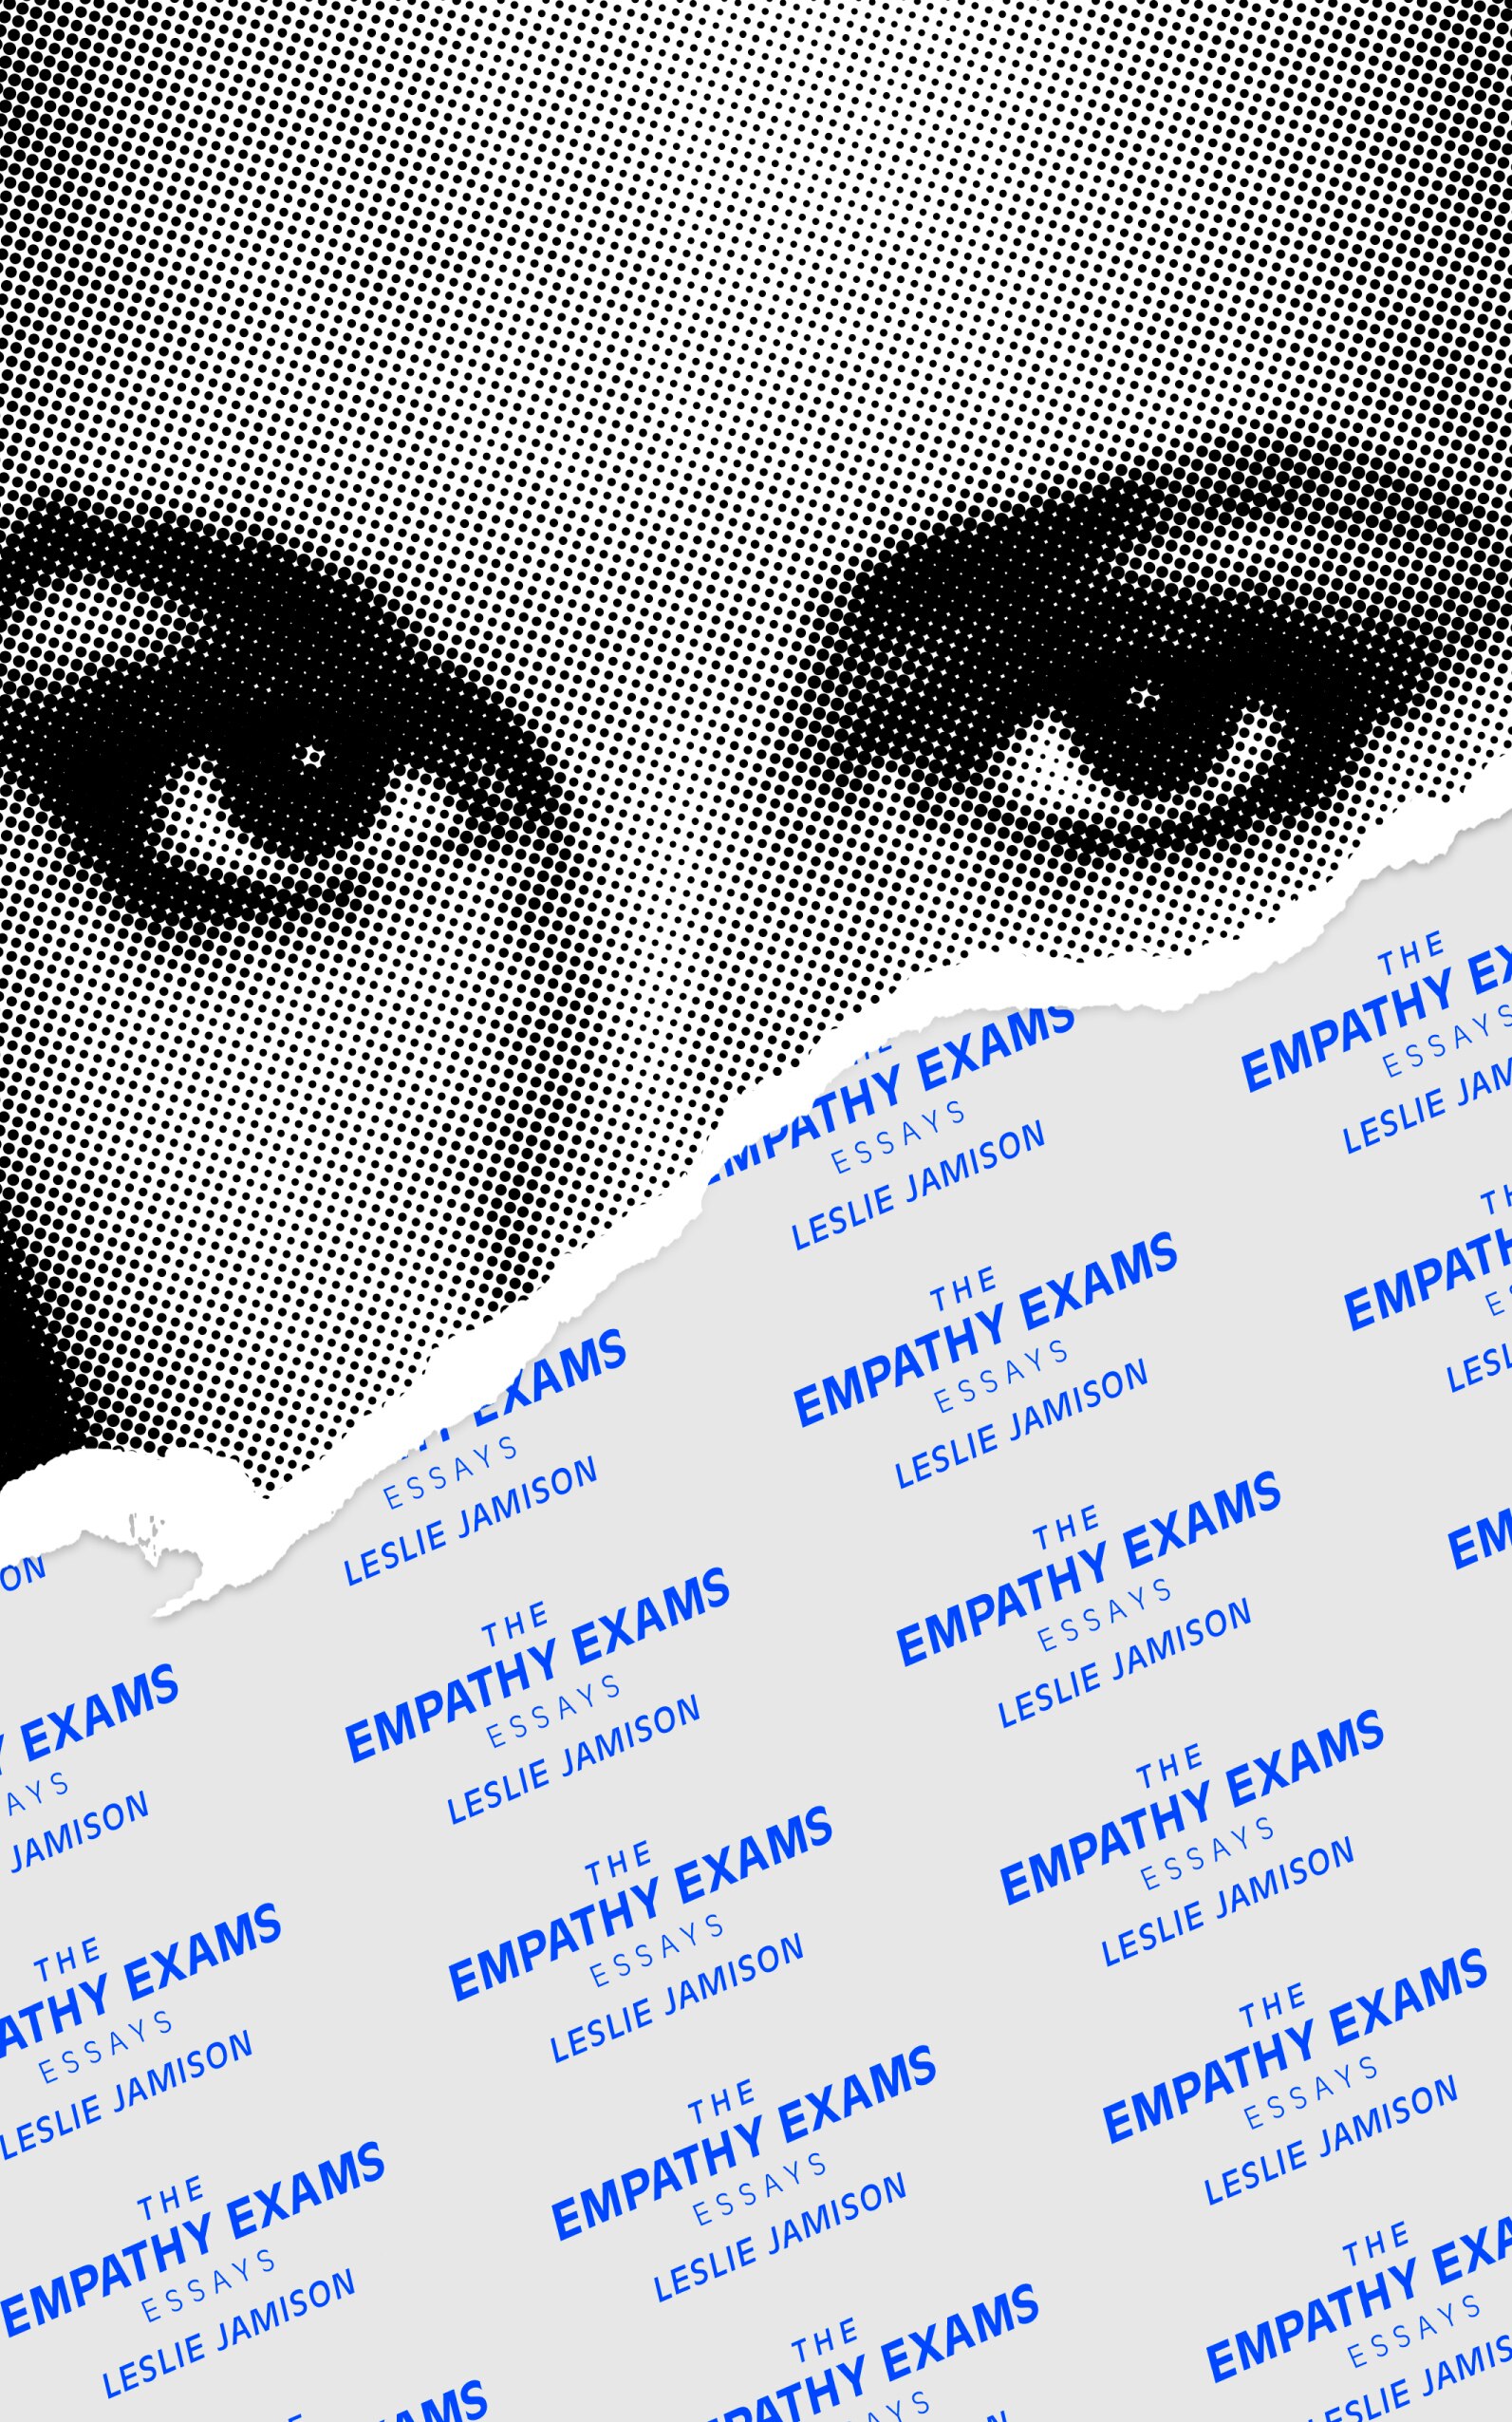 A book cover for The Empathy Exams by Leslie Jamison. It features a newsprint image of the top half of a woman's face.